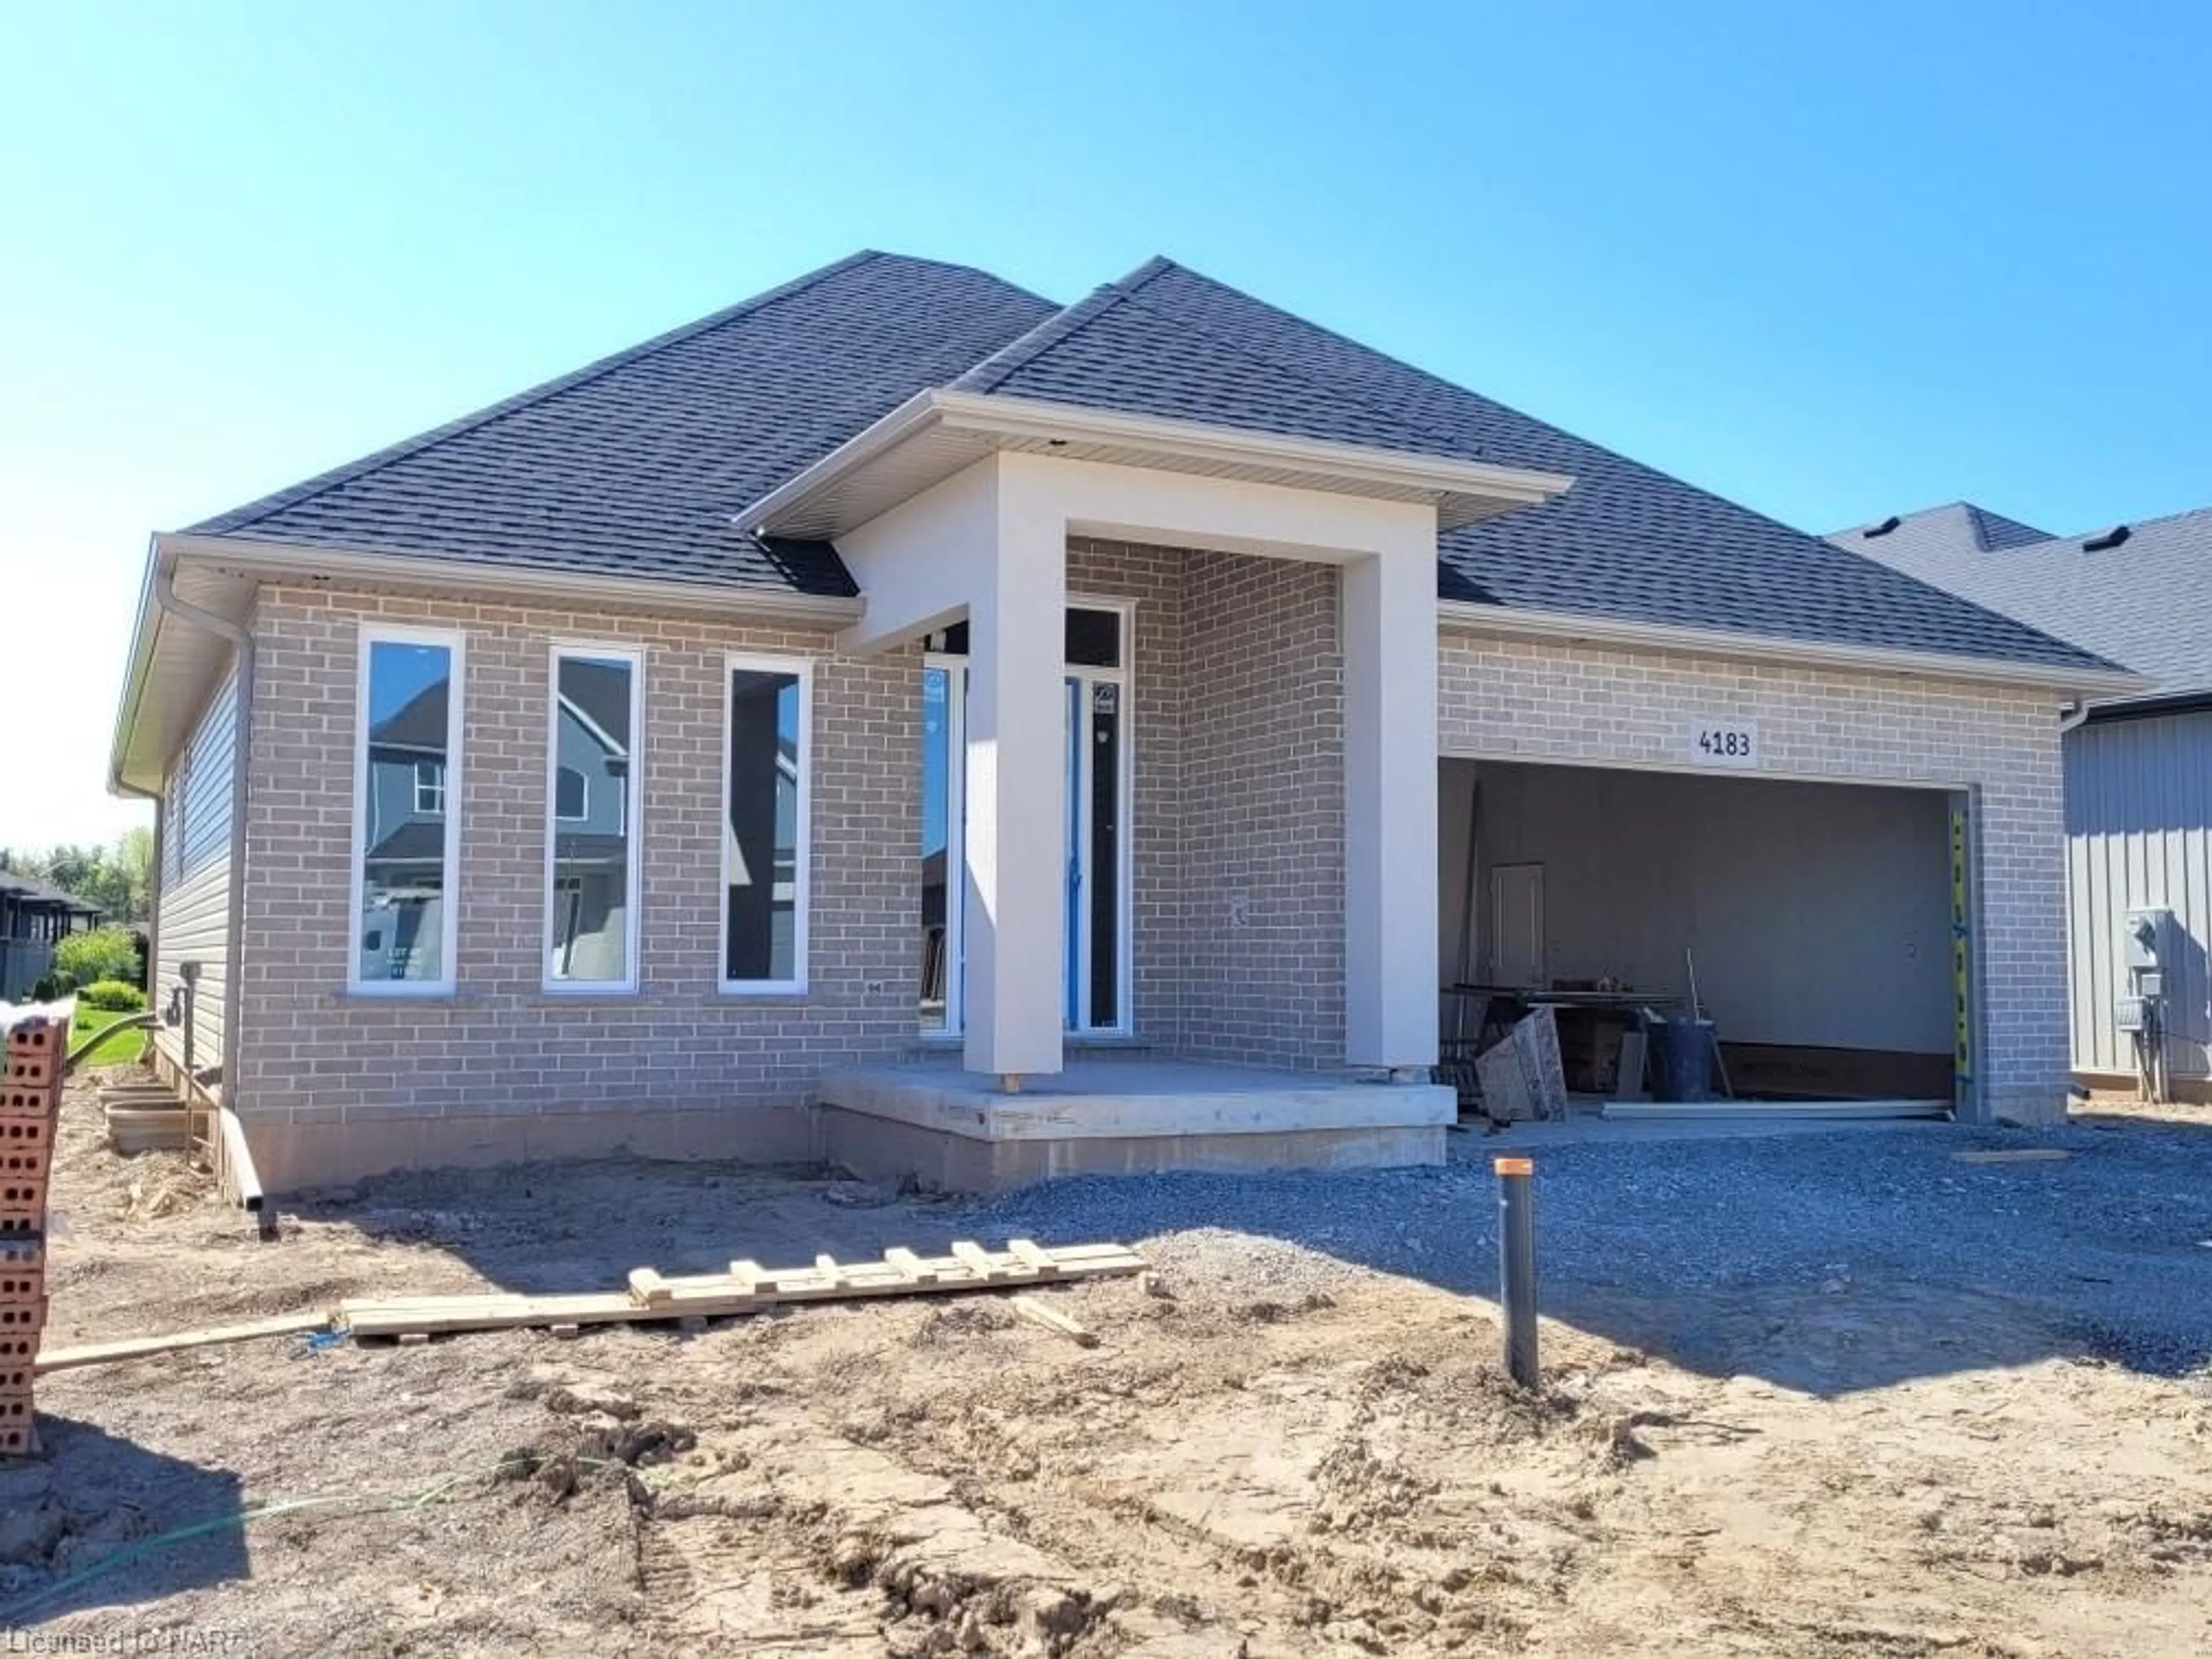 Home with brick exterior material for 4183 Village Creek Dr, Stevensville Ontario L0S 1S0